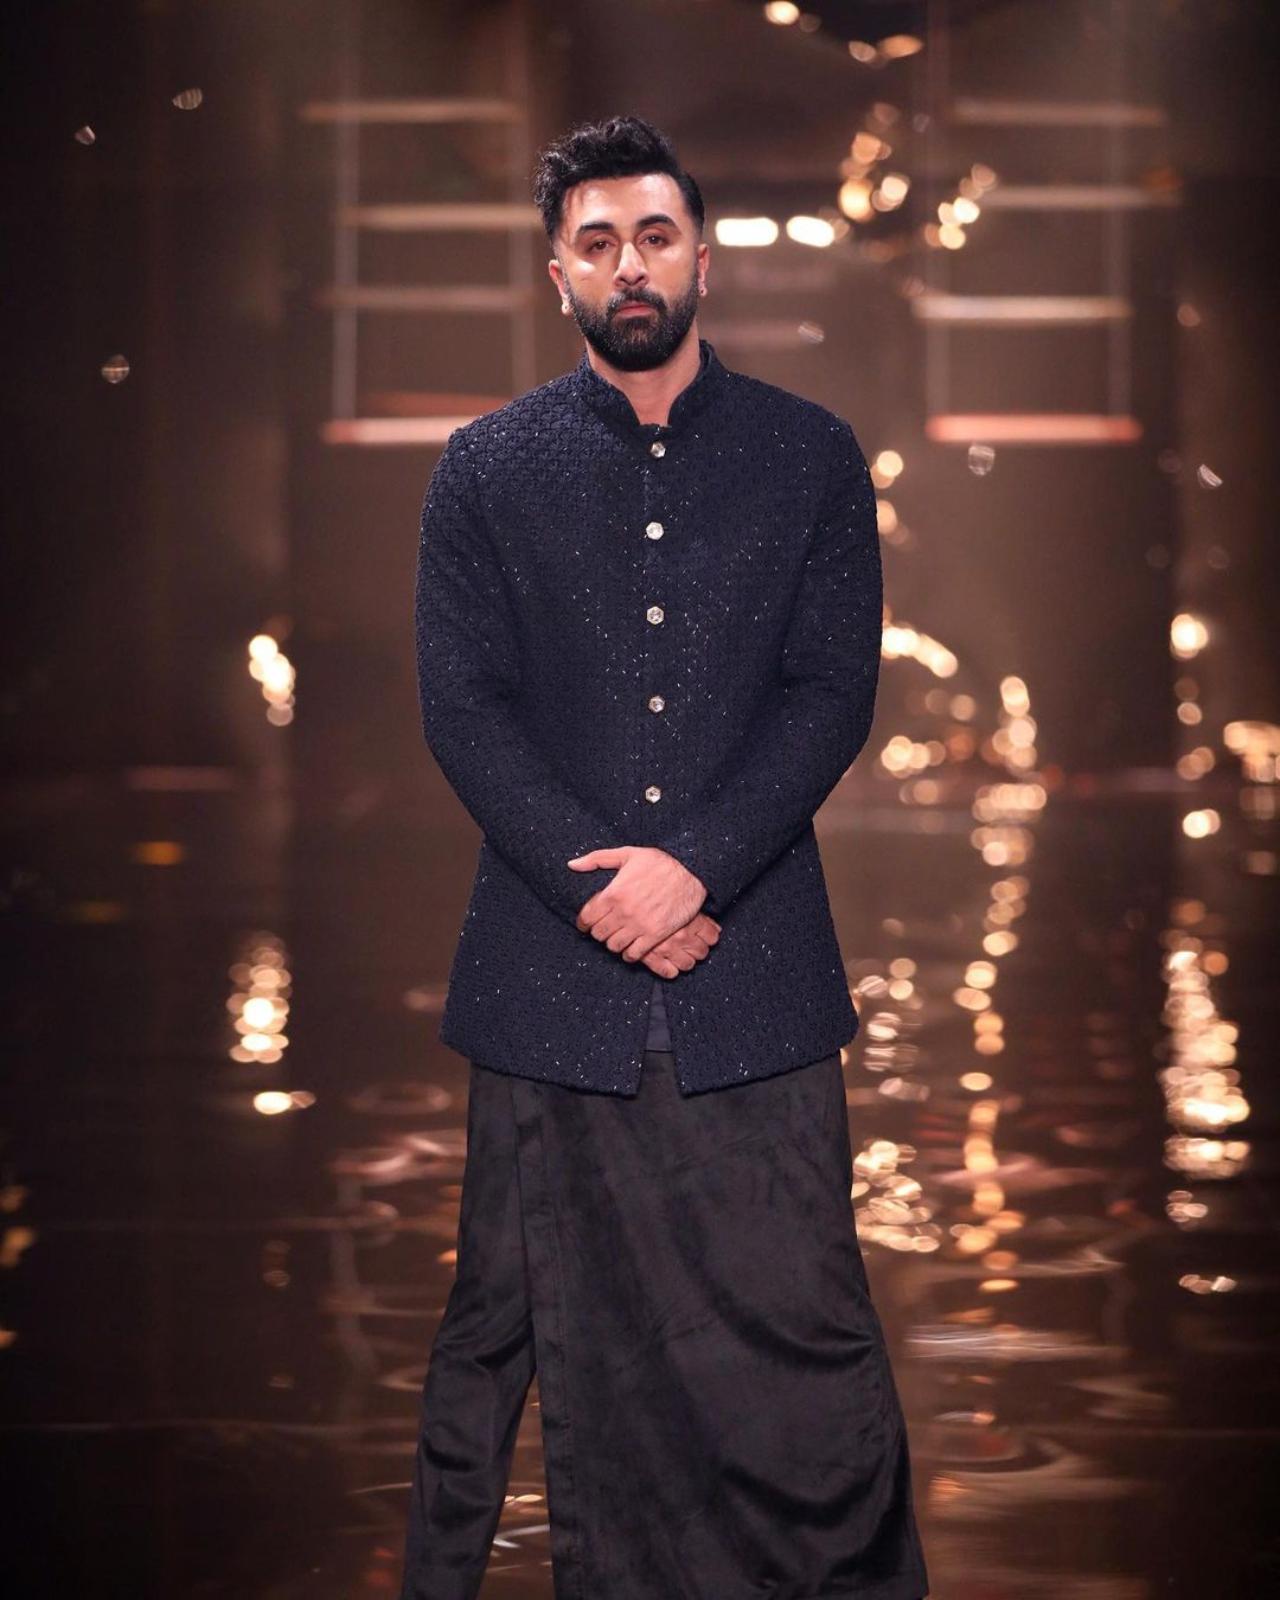 Ranbir Kapoor represented the 'Dhup Chao' collection. The actor donned a stylish, buttoned-up kurta that boasted a shimmering yet classy appeal, perfectly complemented by lungi-esque pants that added a touch of contemporary flair to the overall traditional look